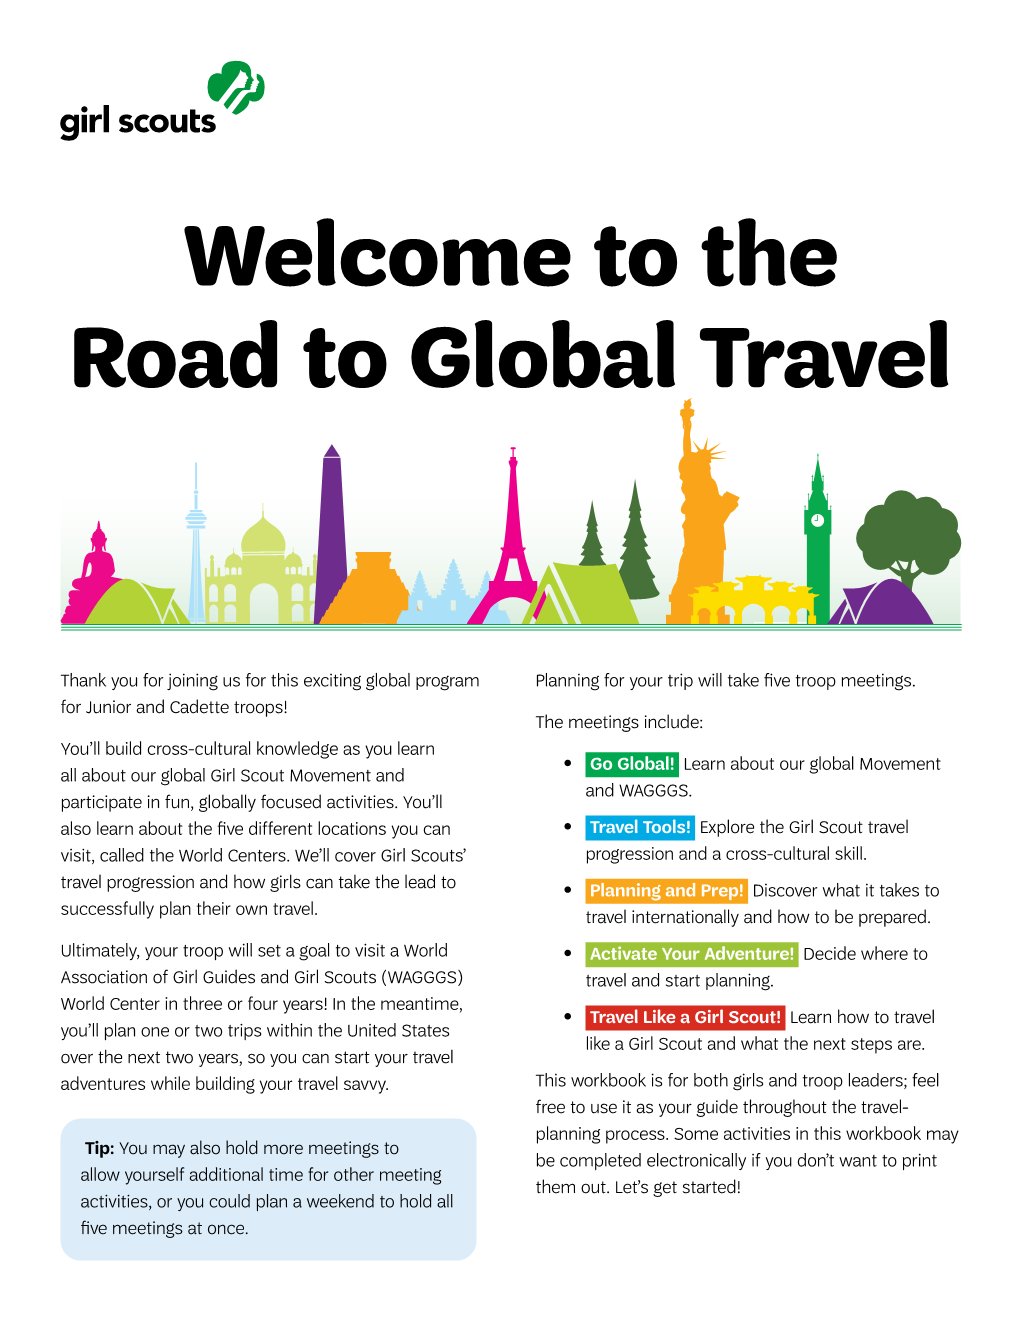 The Road to Global Travel